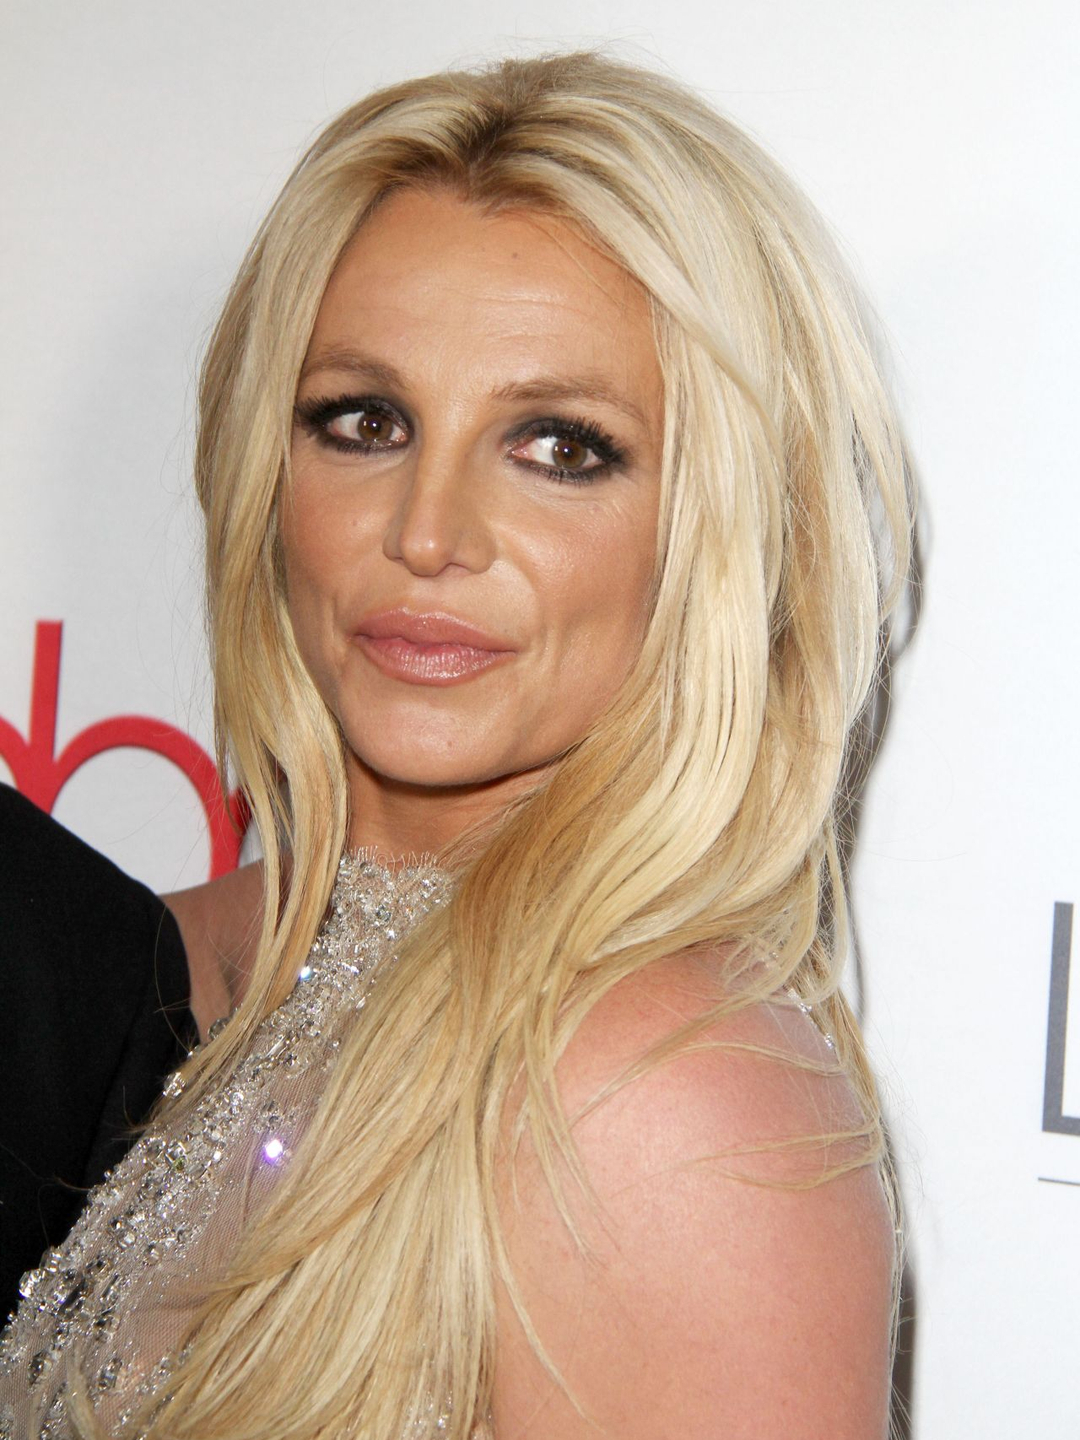 Britney Spears does she have a husband